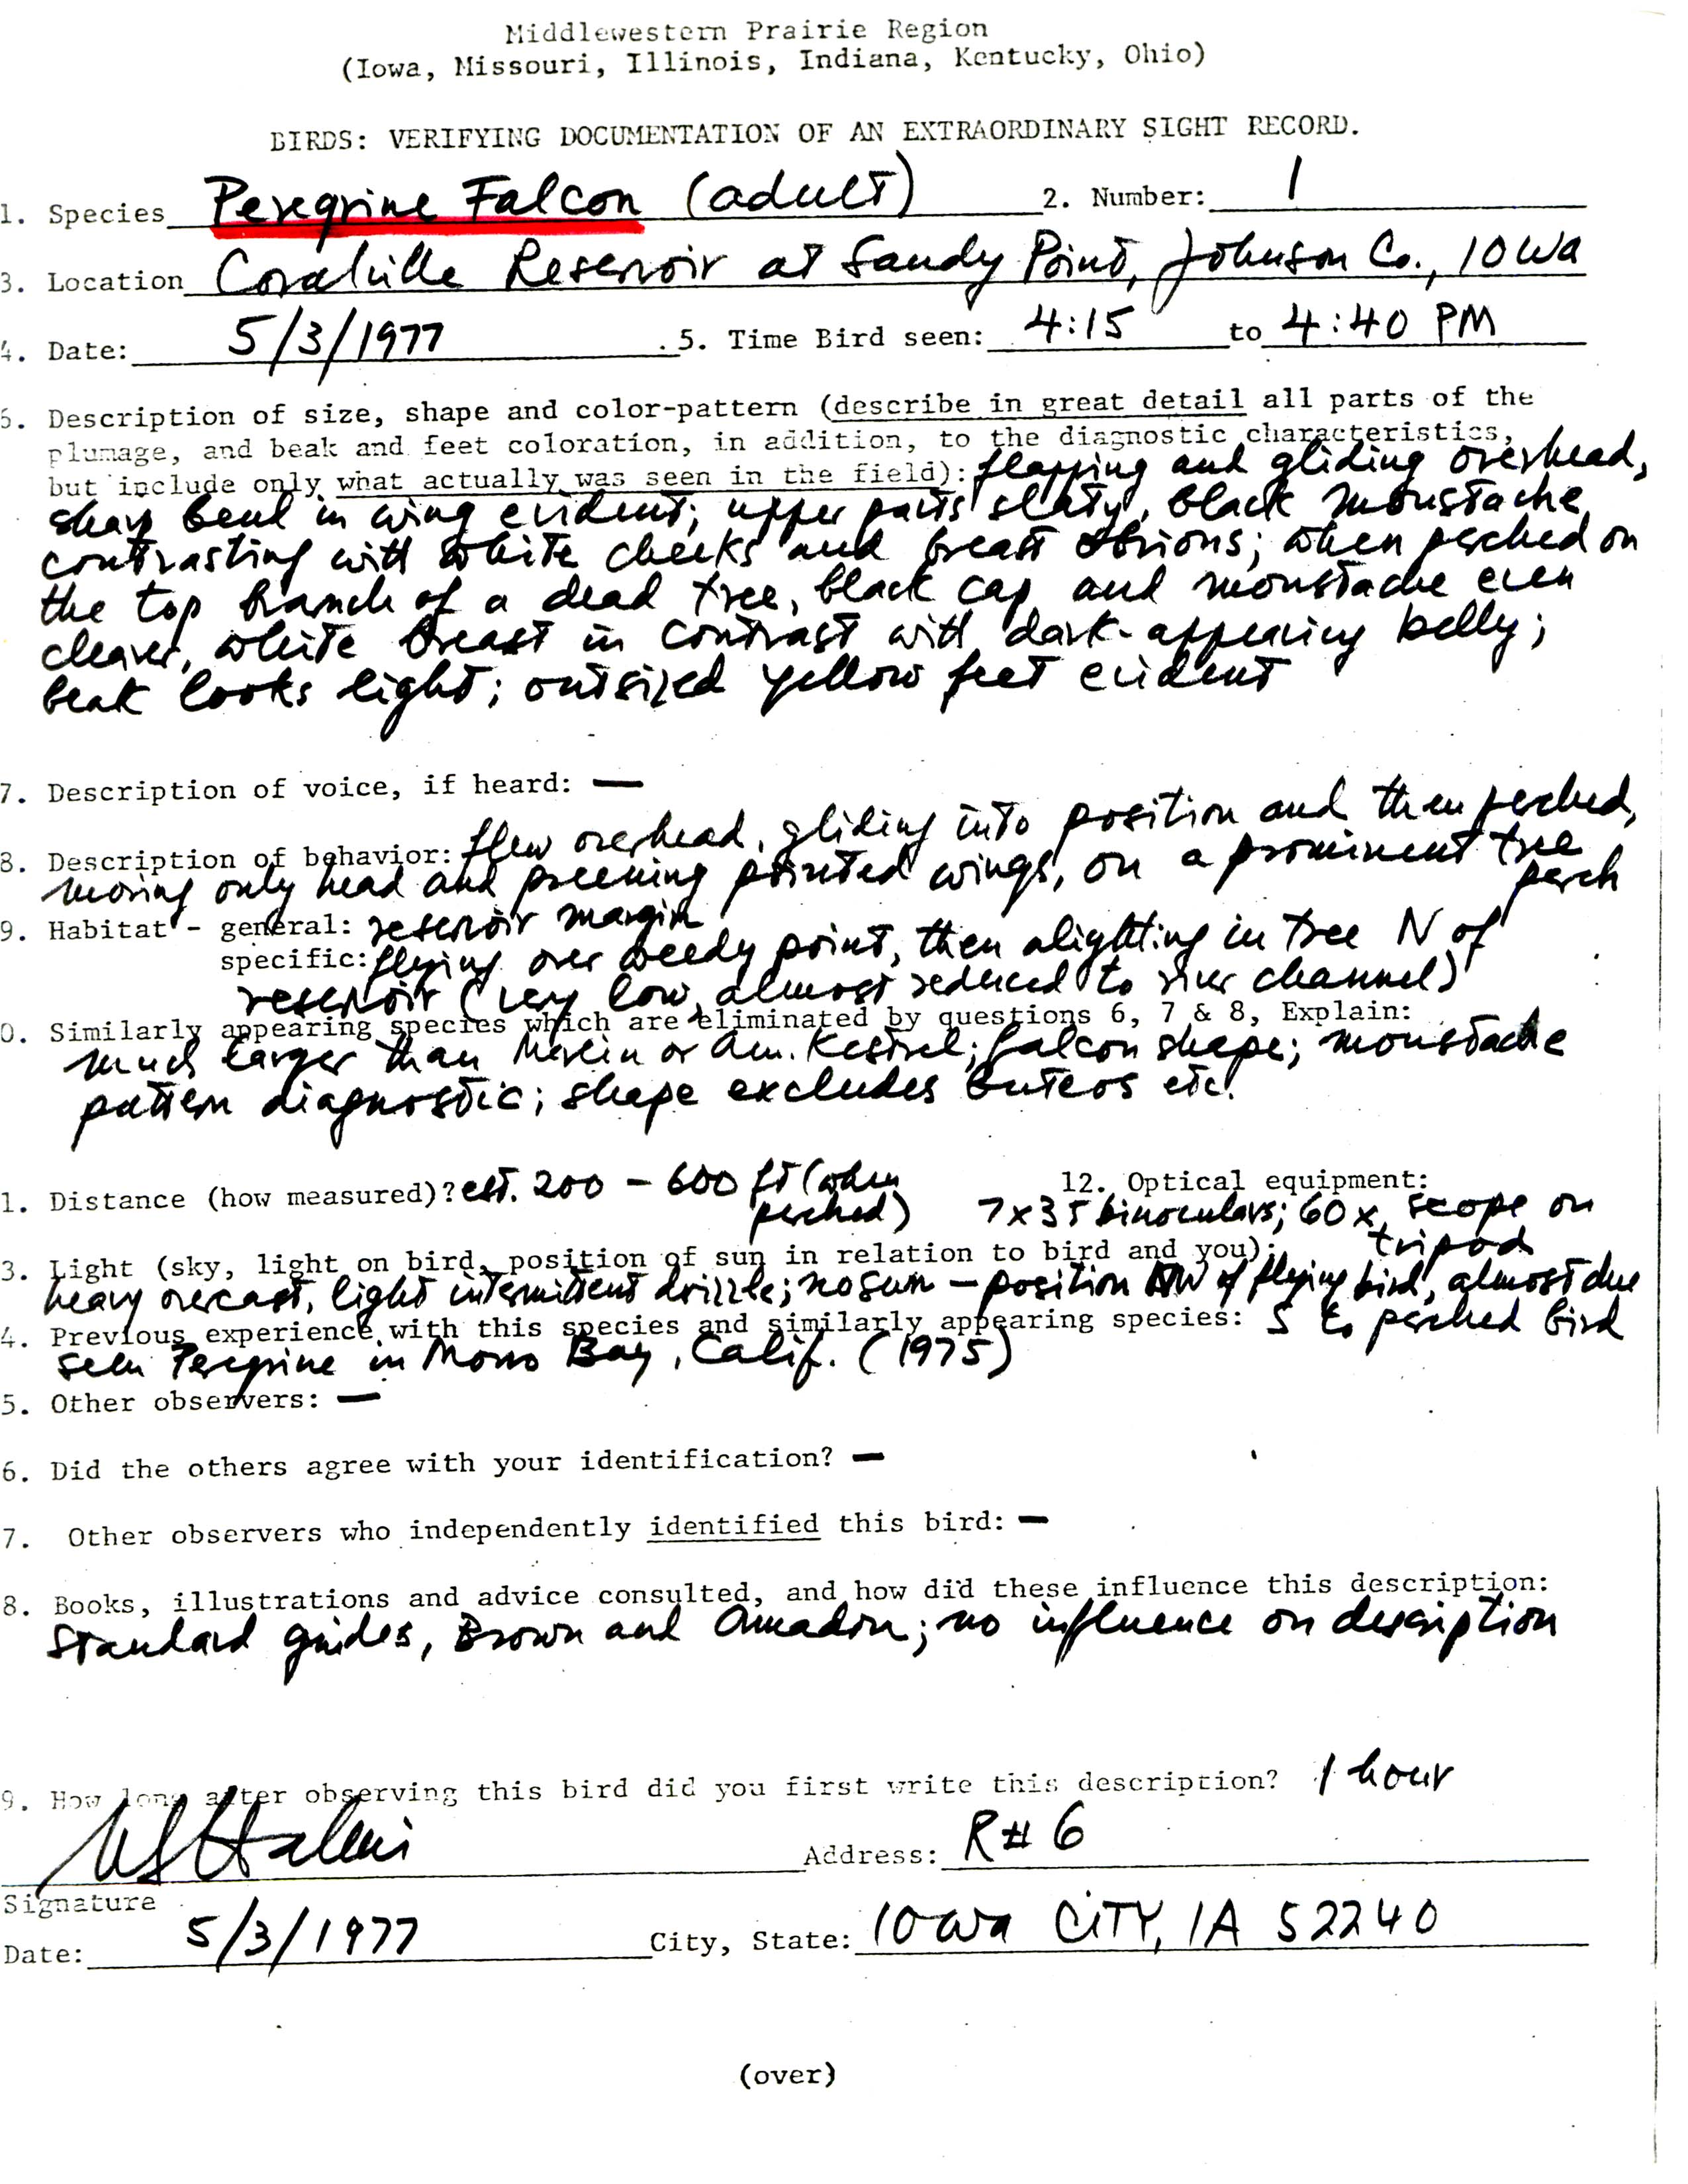 Rare bird documentation form for Peregrine Falcon at Sand Point at Coralville Reservoir, 1977